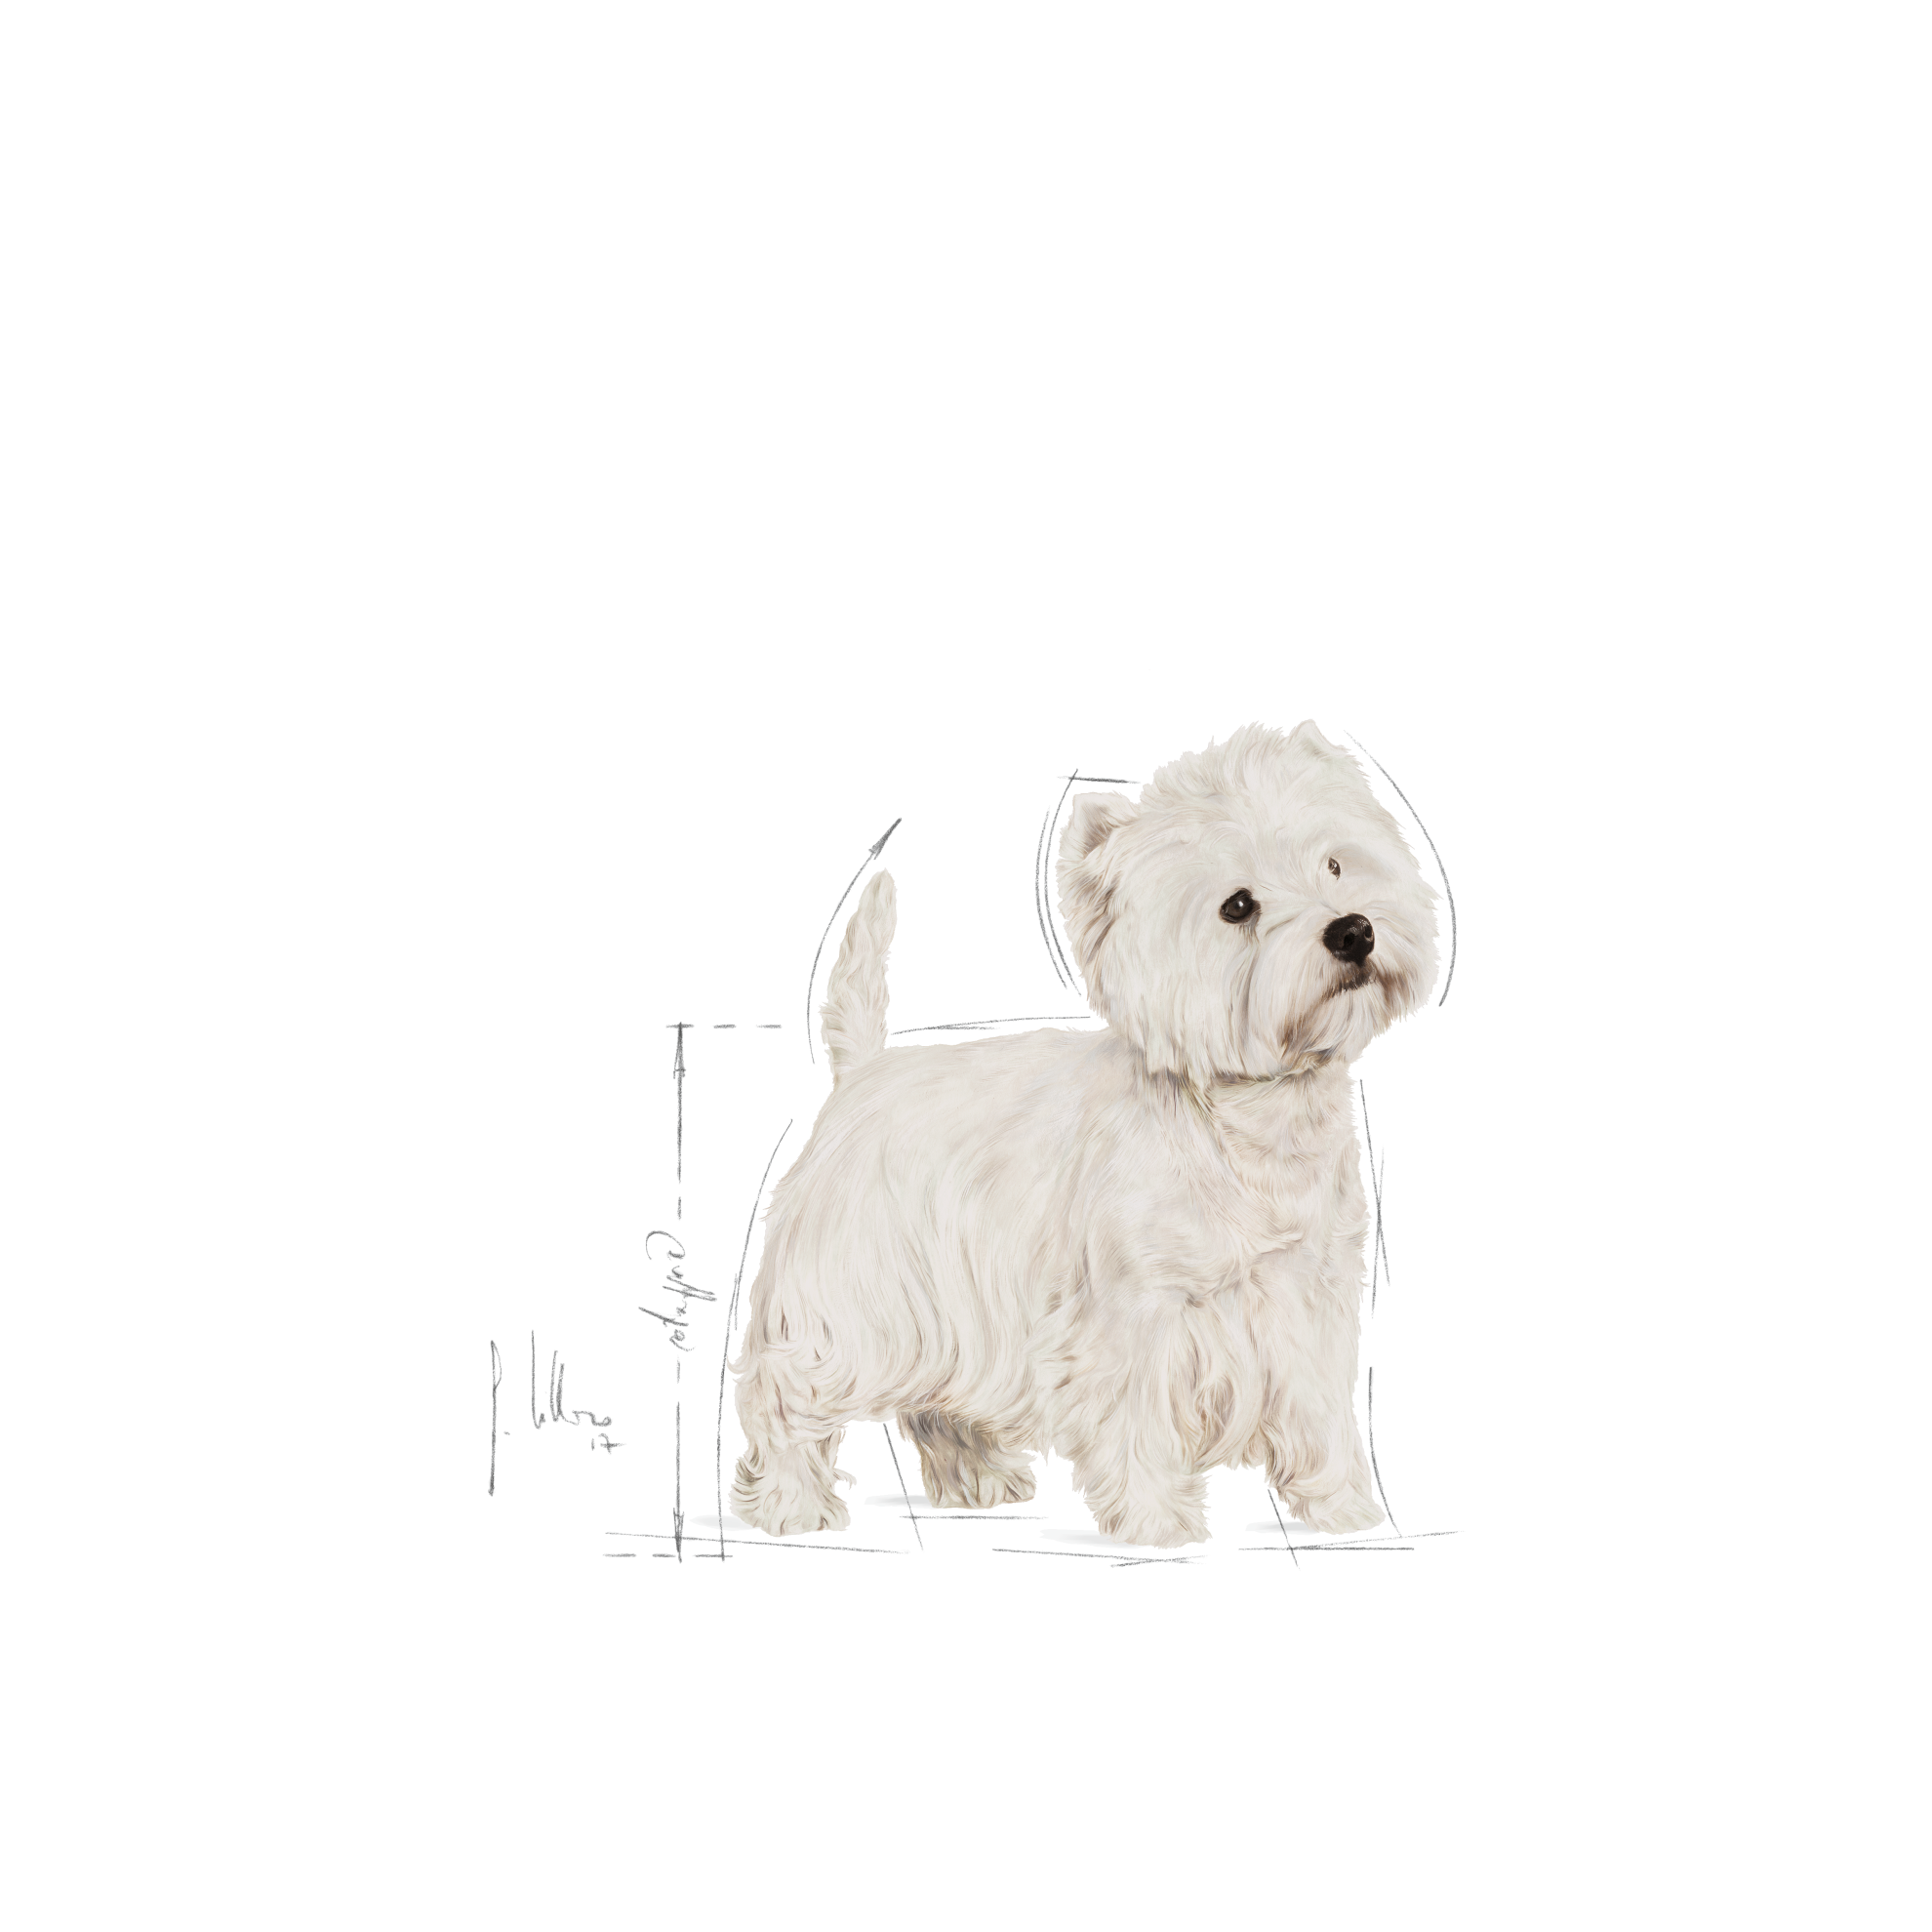 west highland white terrier royal canin